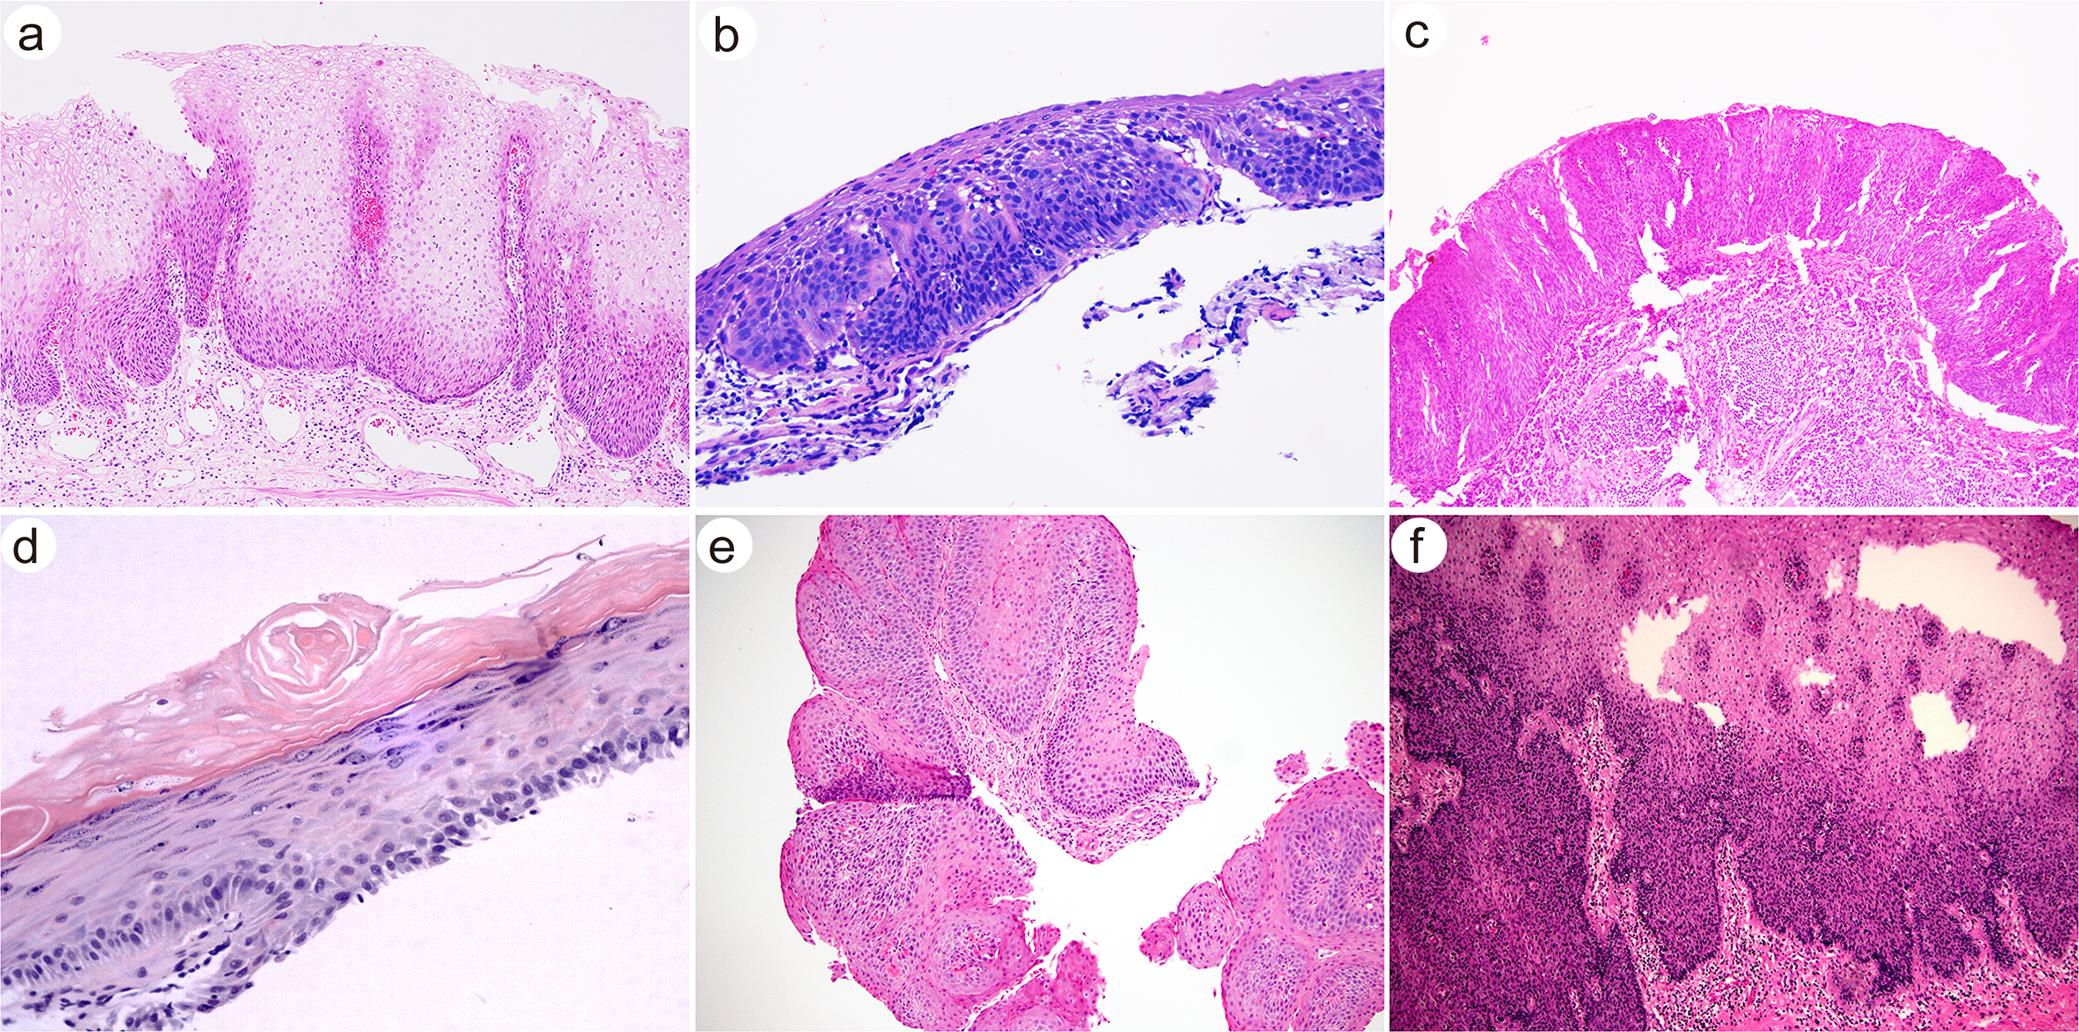 Precursor lesions and mimics of esophageal well-differentiated squamous cell carcinoma.